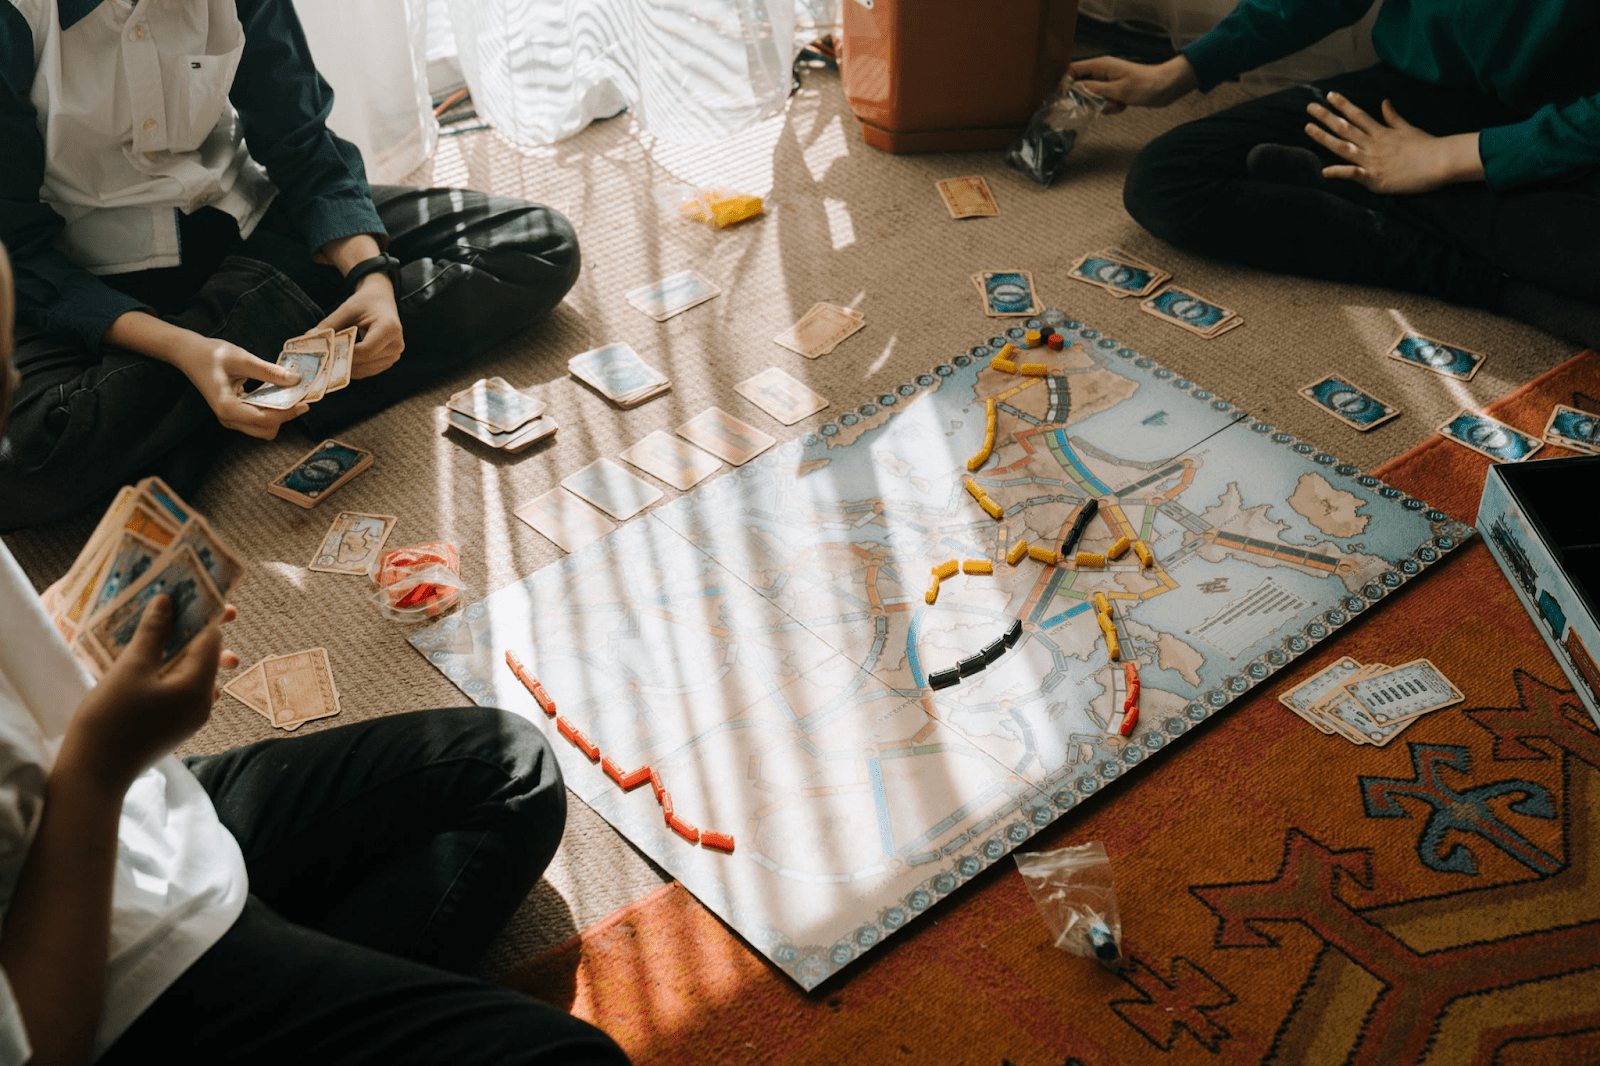 spend time with family board games